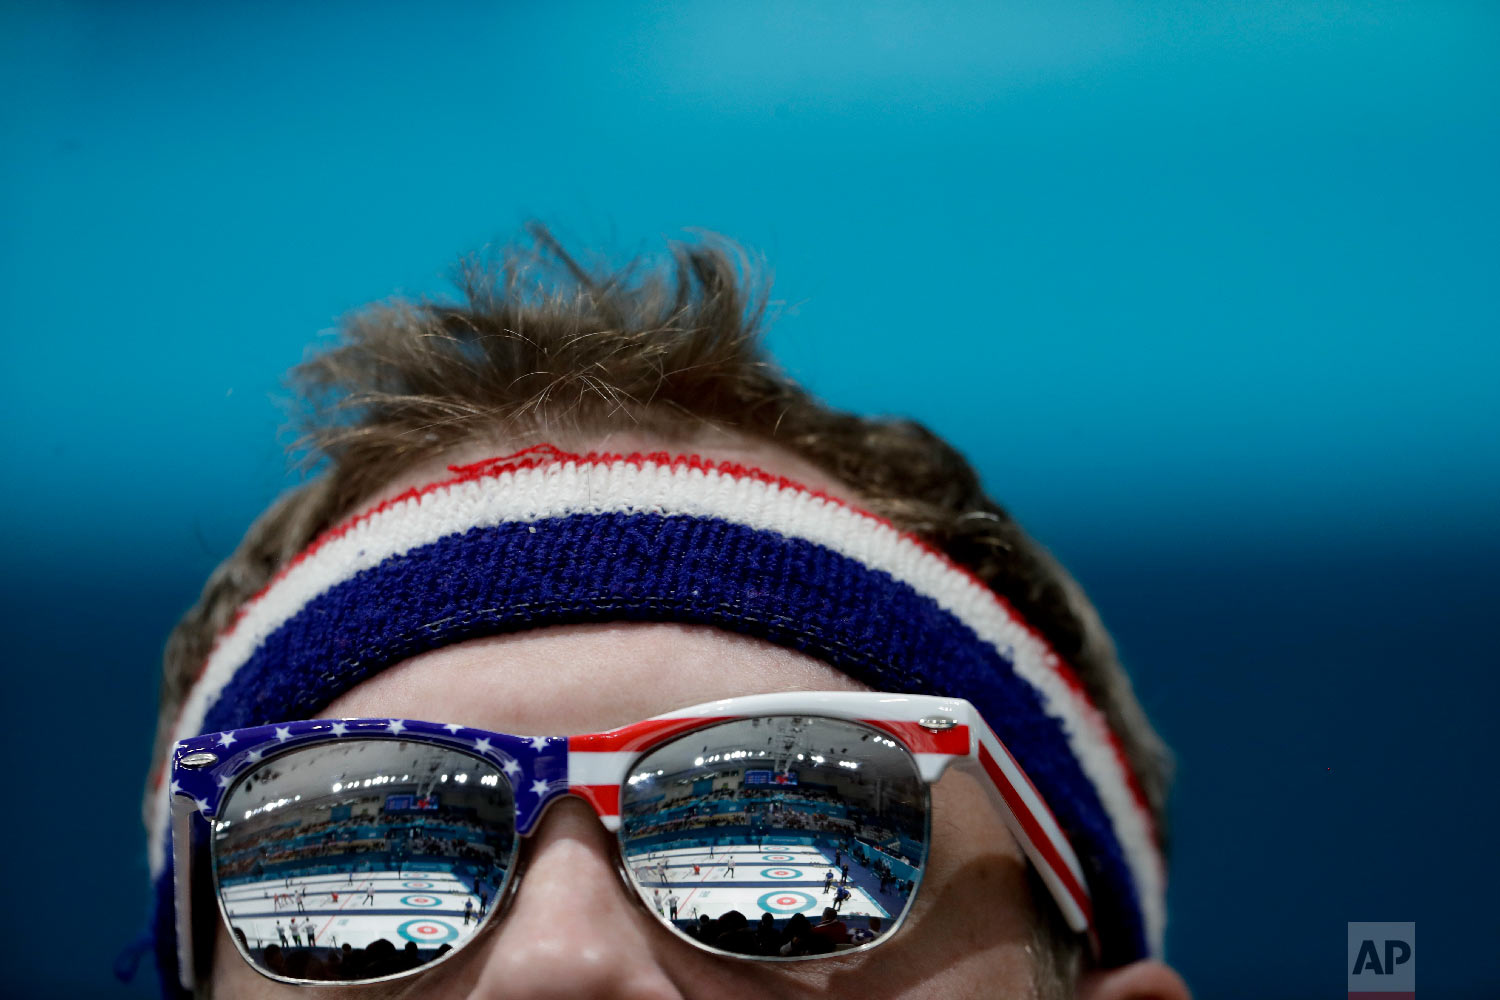  A fan from the United States watches men's curling matches at the 2018 Winter Olympics in Gangneung, South Korea, Friday, Feb. 16, 2018. (AP Photo/Natacha Pisarenko) 